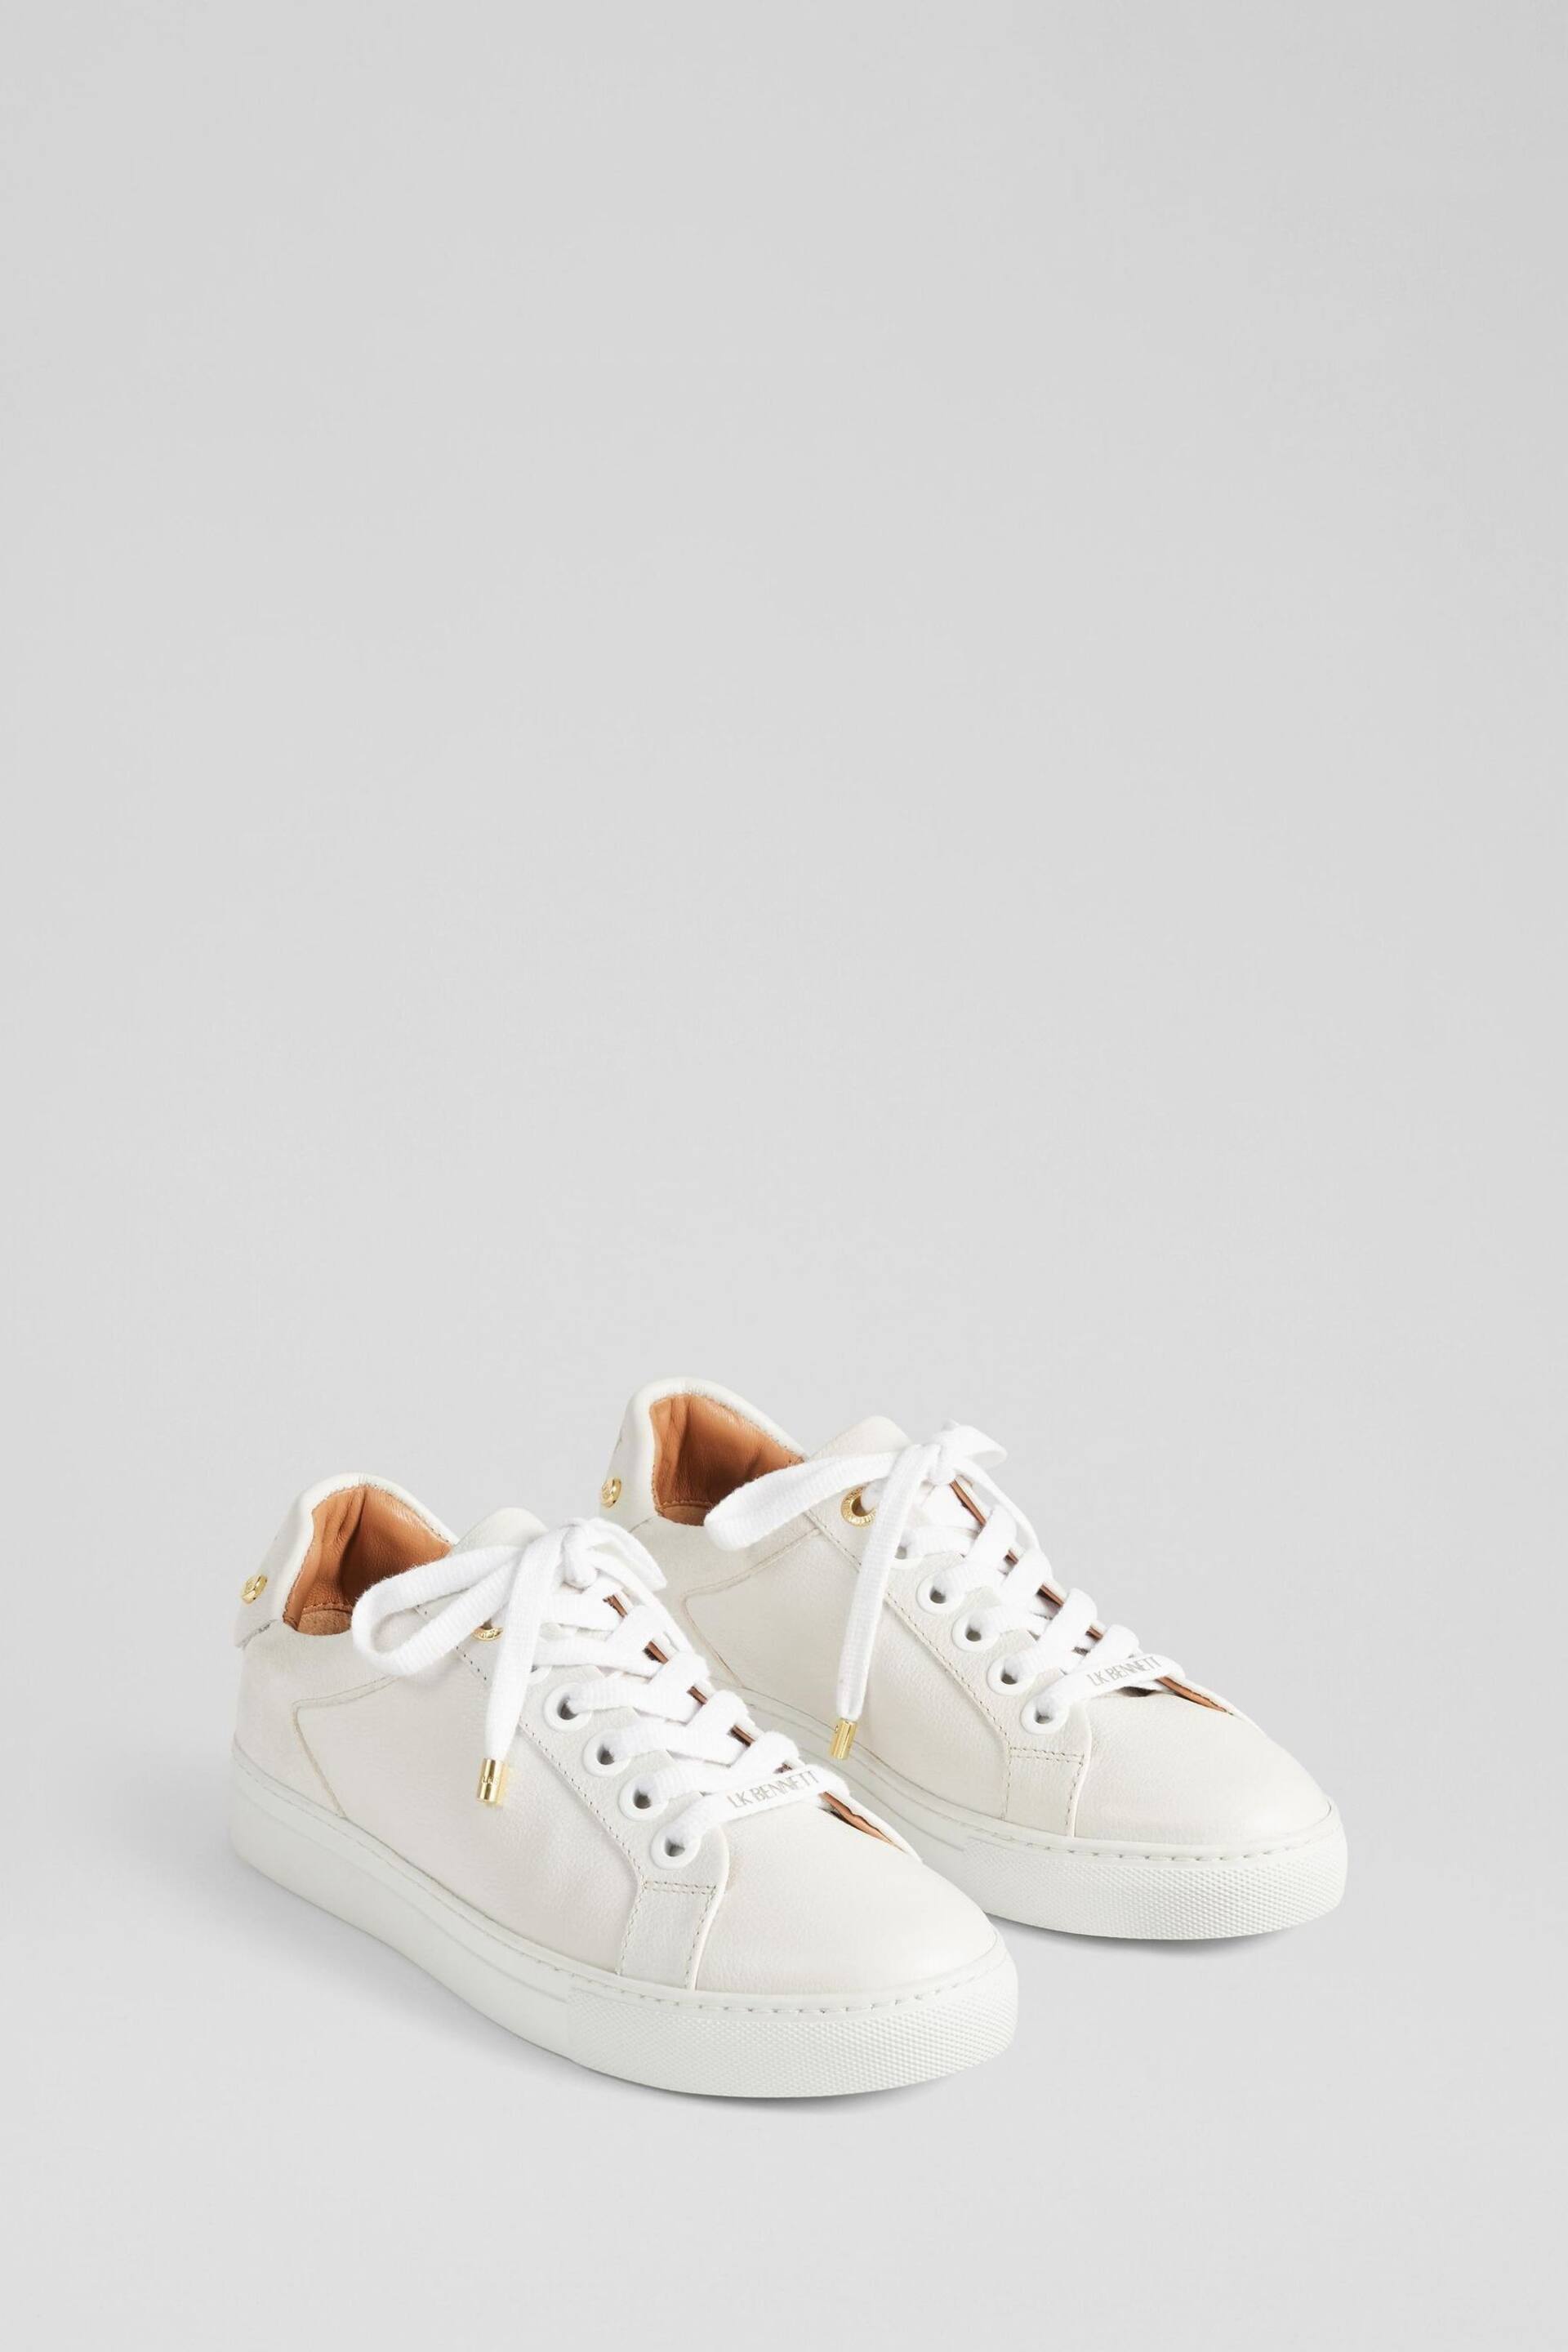 LK Bennett Signature Leather Trainers - Image 1 of 7